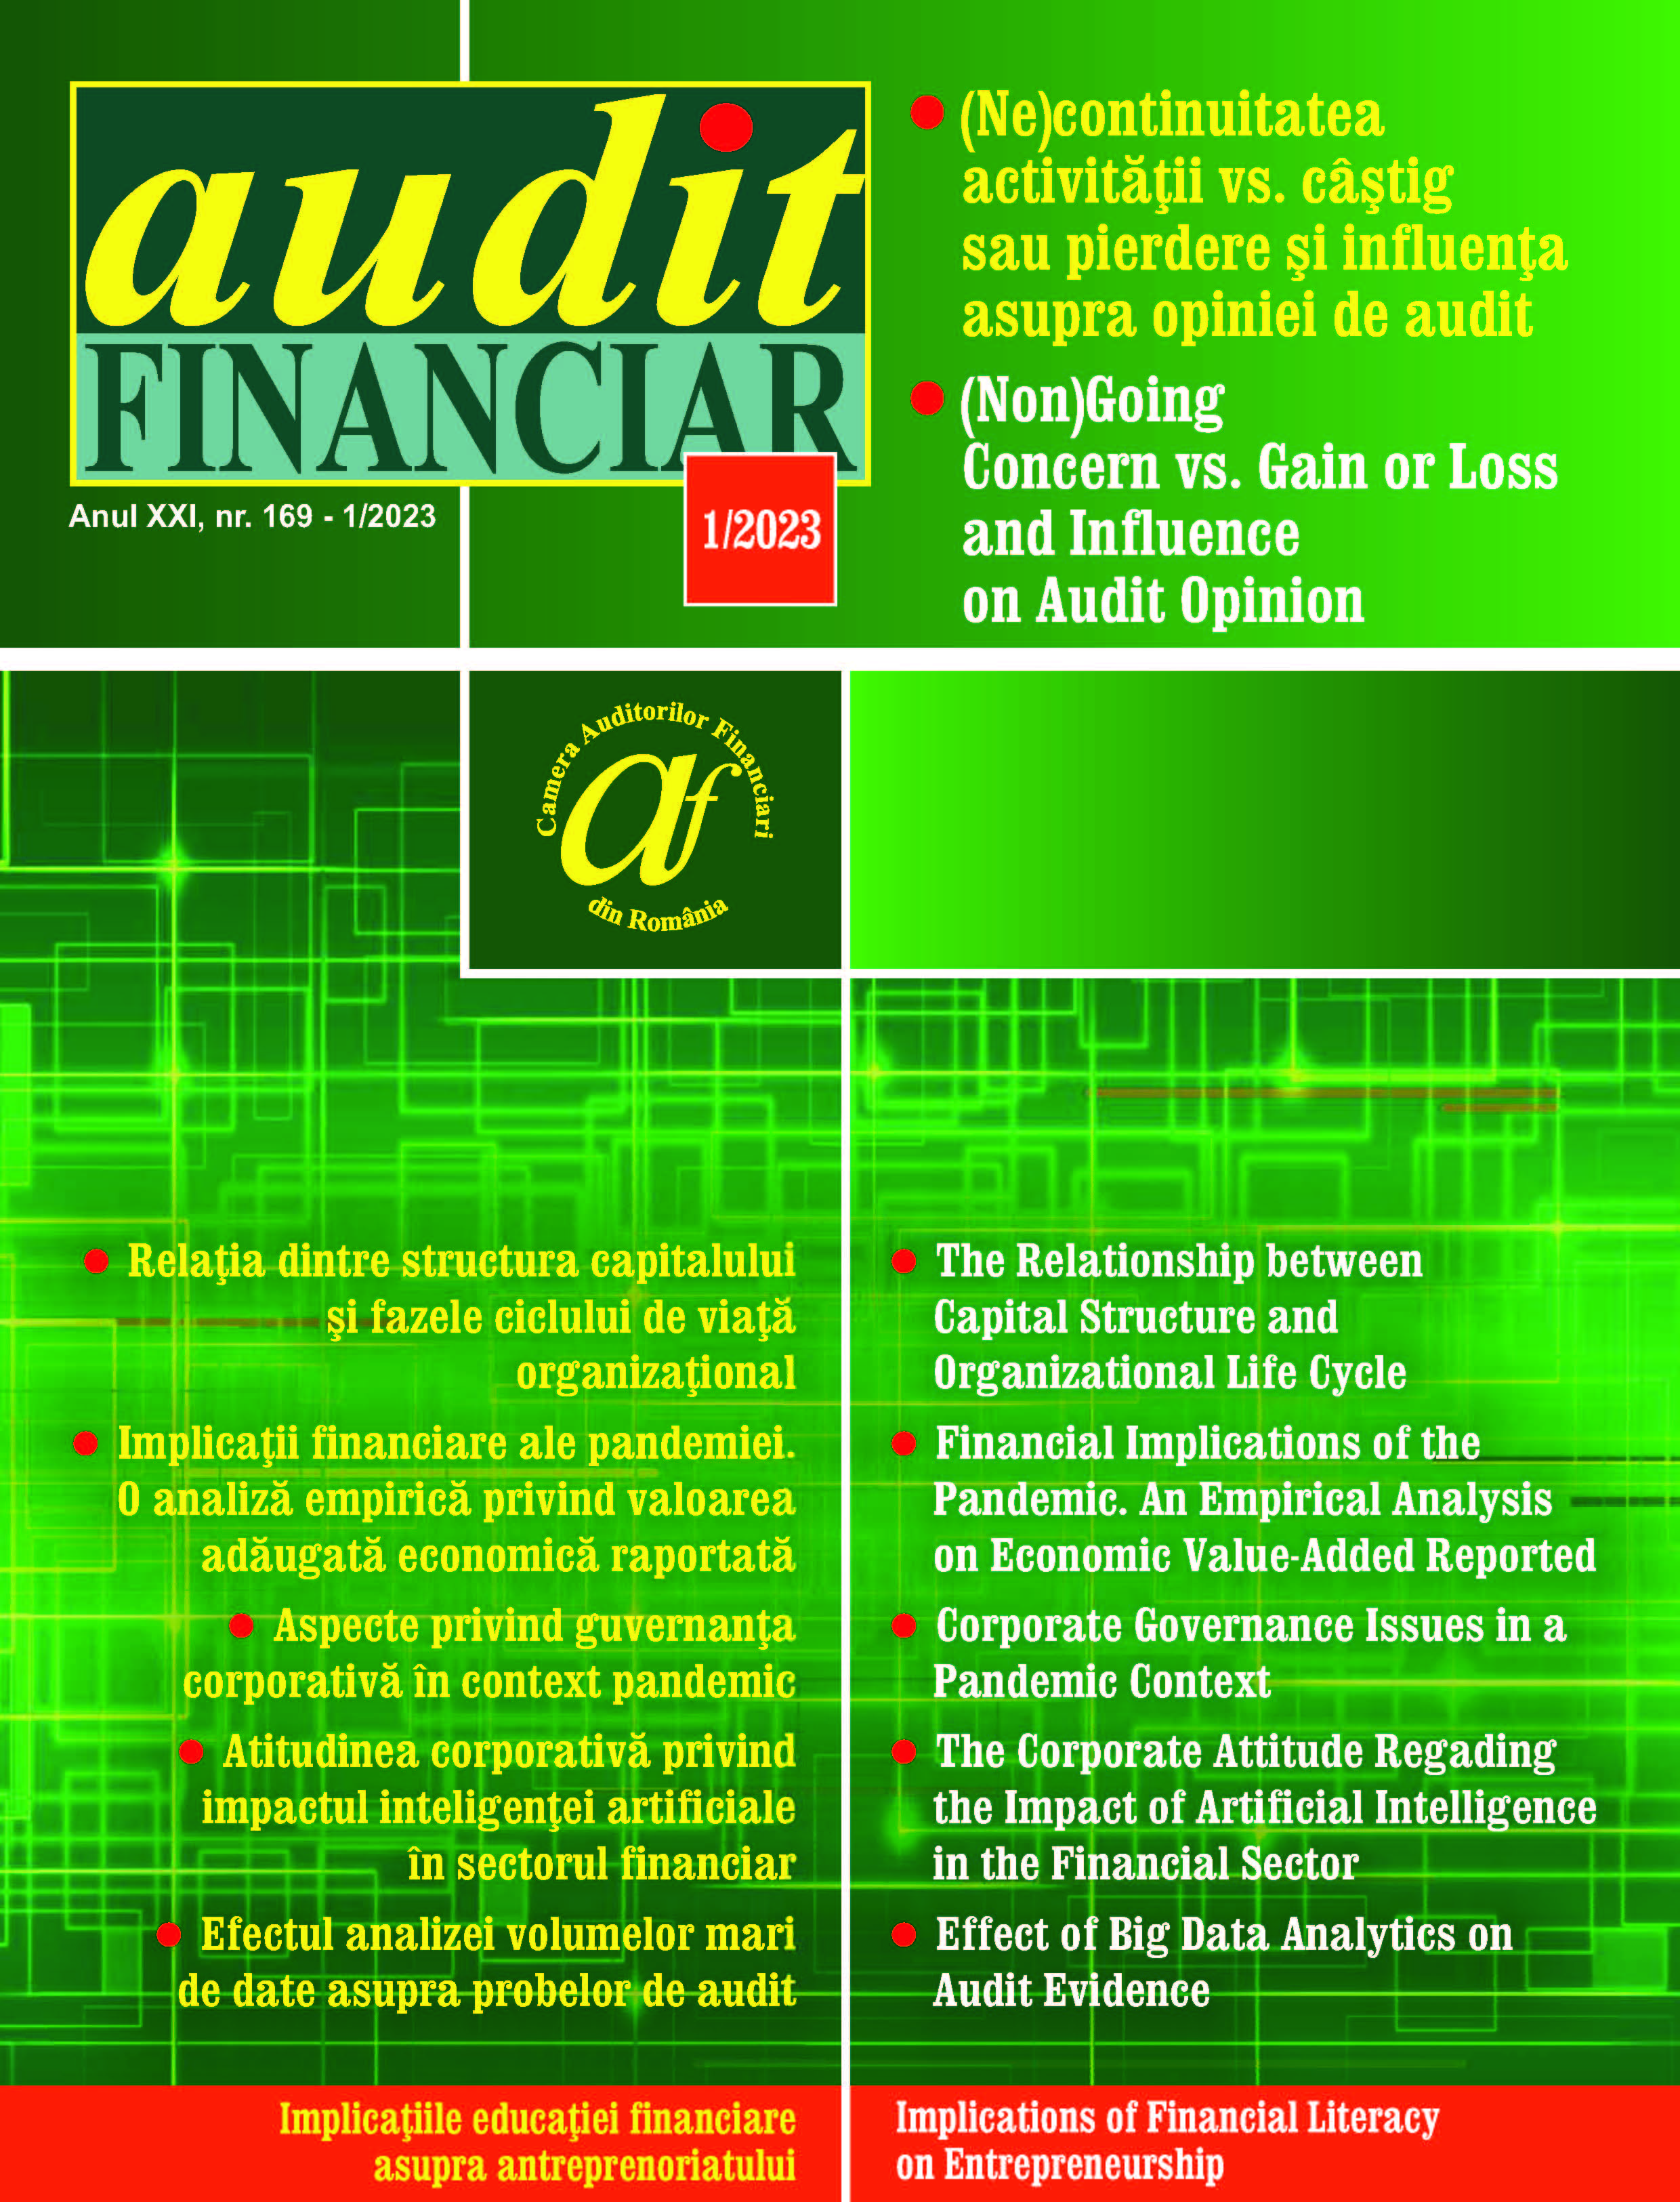 The Corporate Attitude Regading the Impact of Artificial Intelligence in the Financial Sector Cover Image